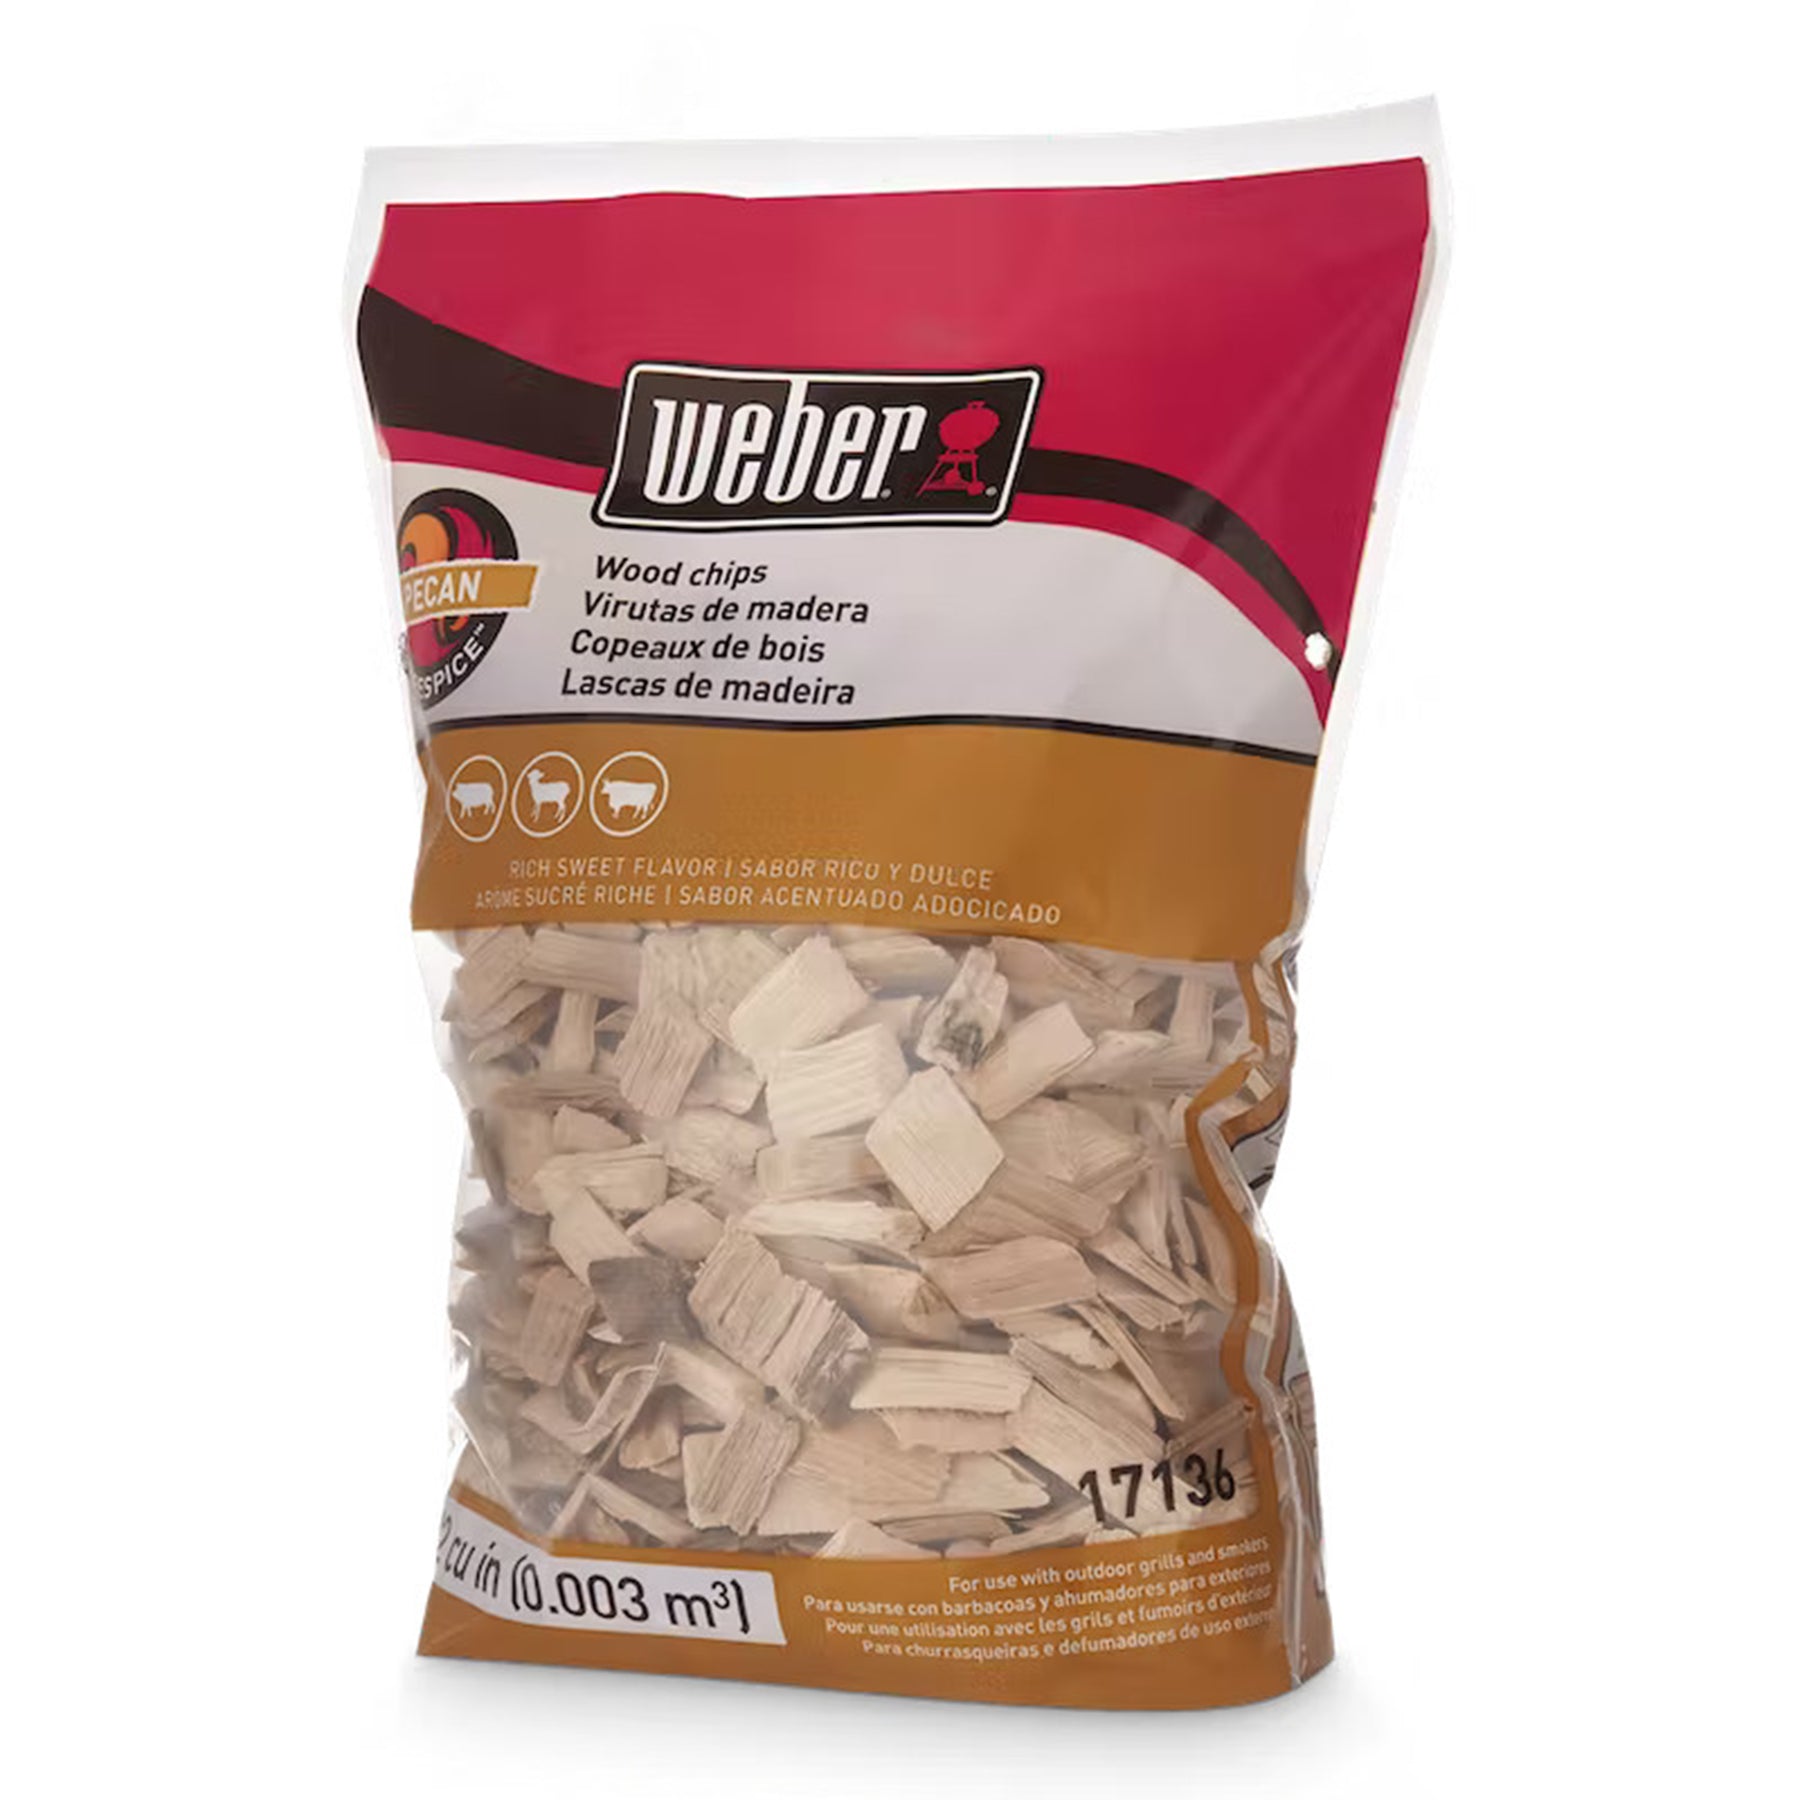 BBQ Wood Chips